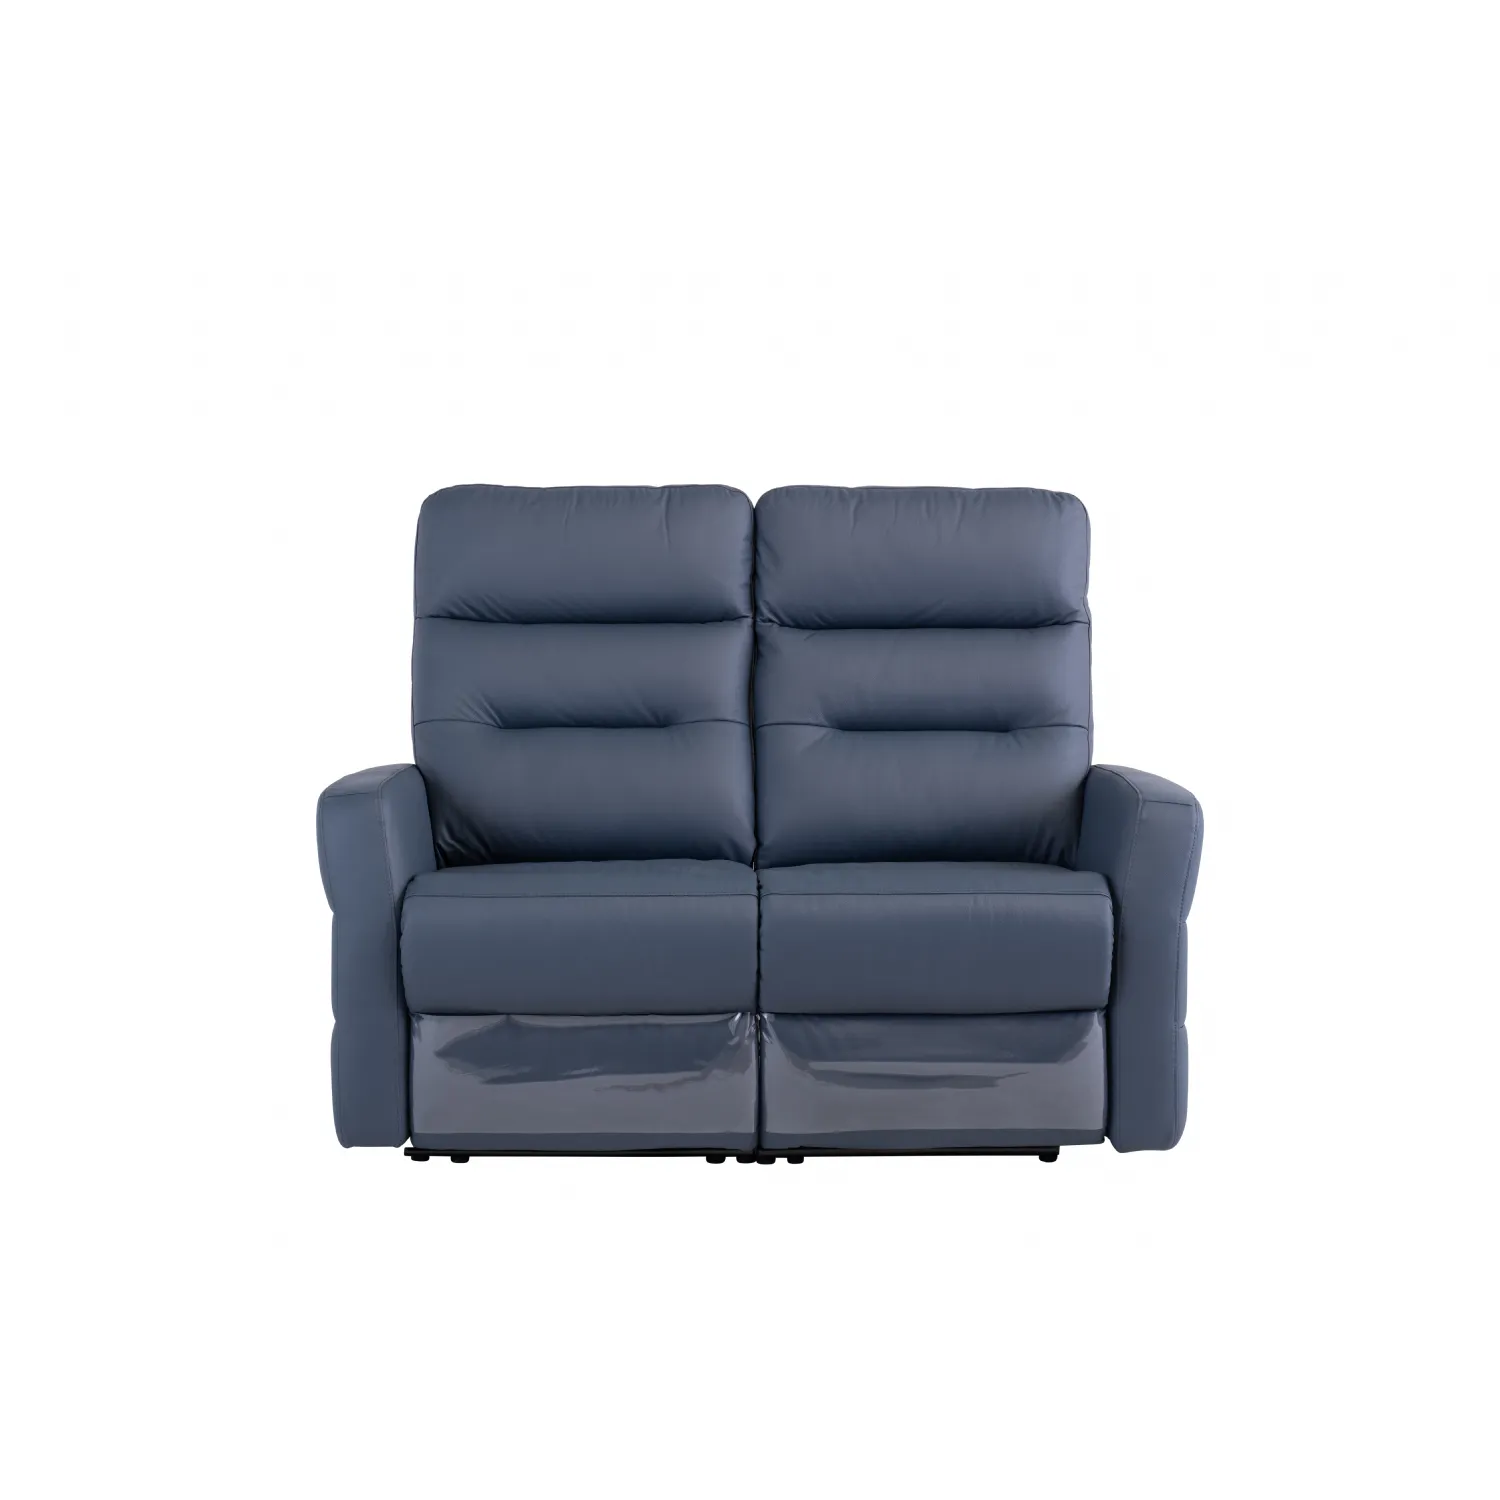 Blue Leather Electric Recliner 2 Seat Sofa